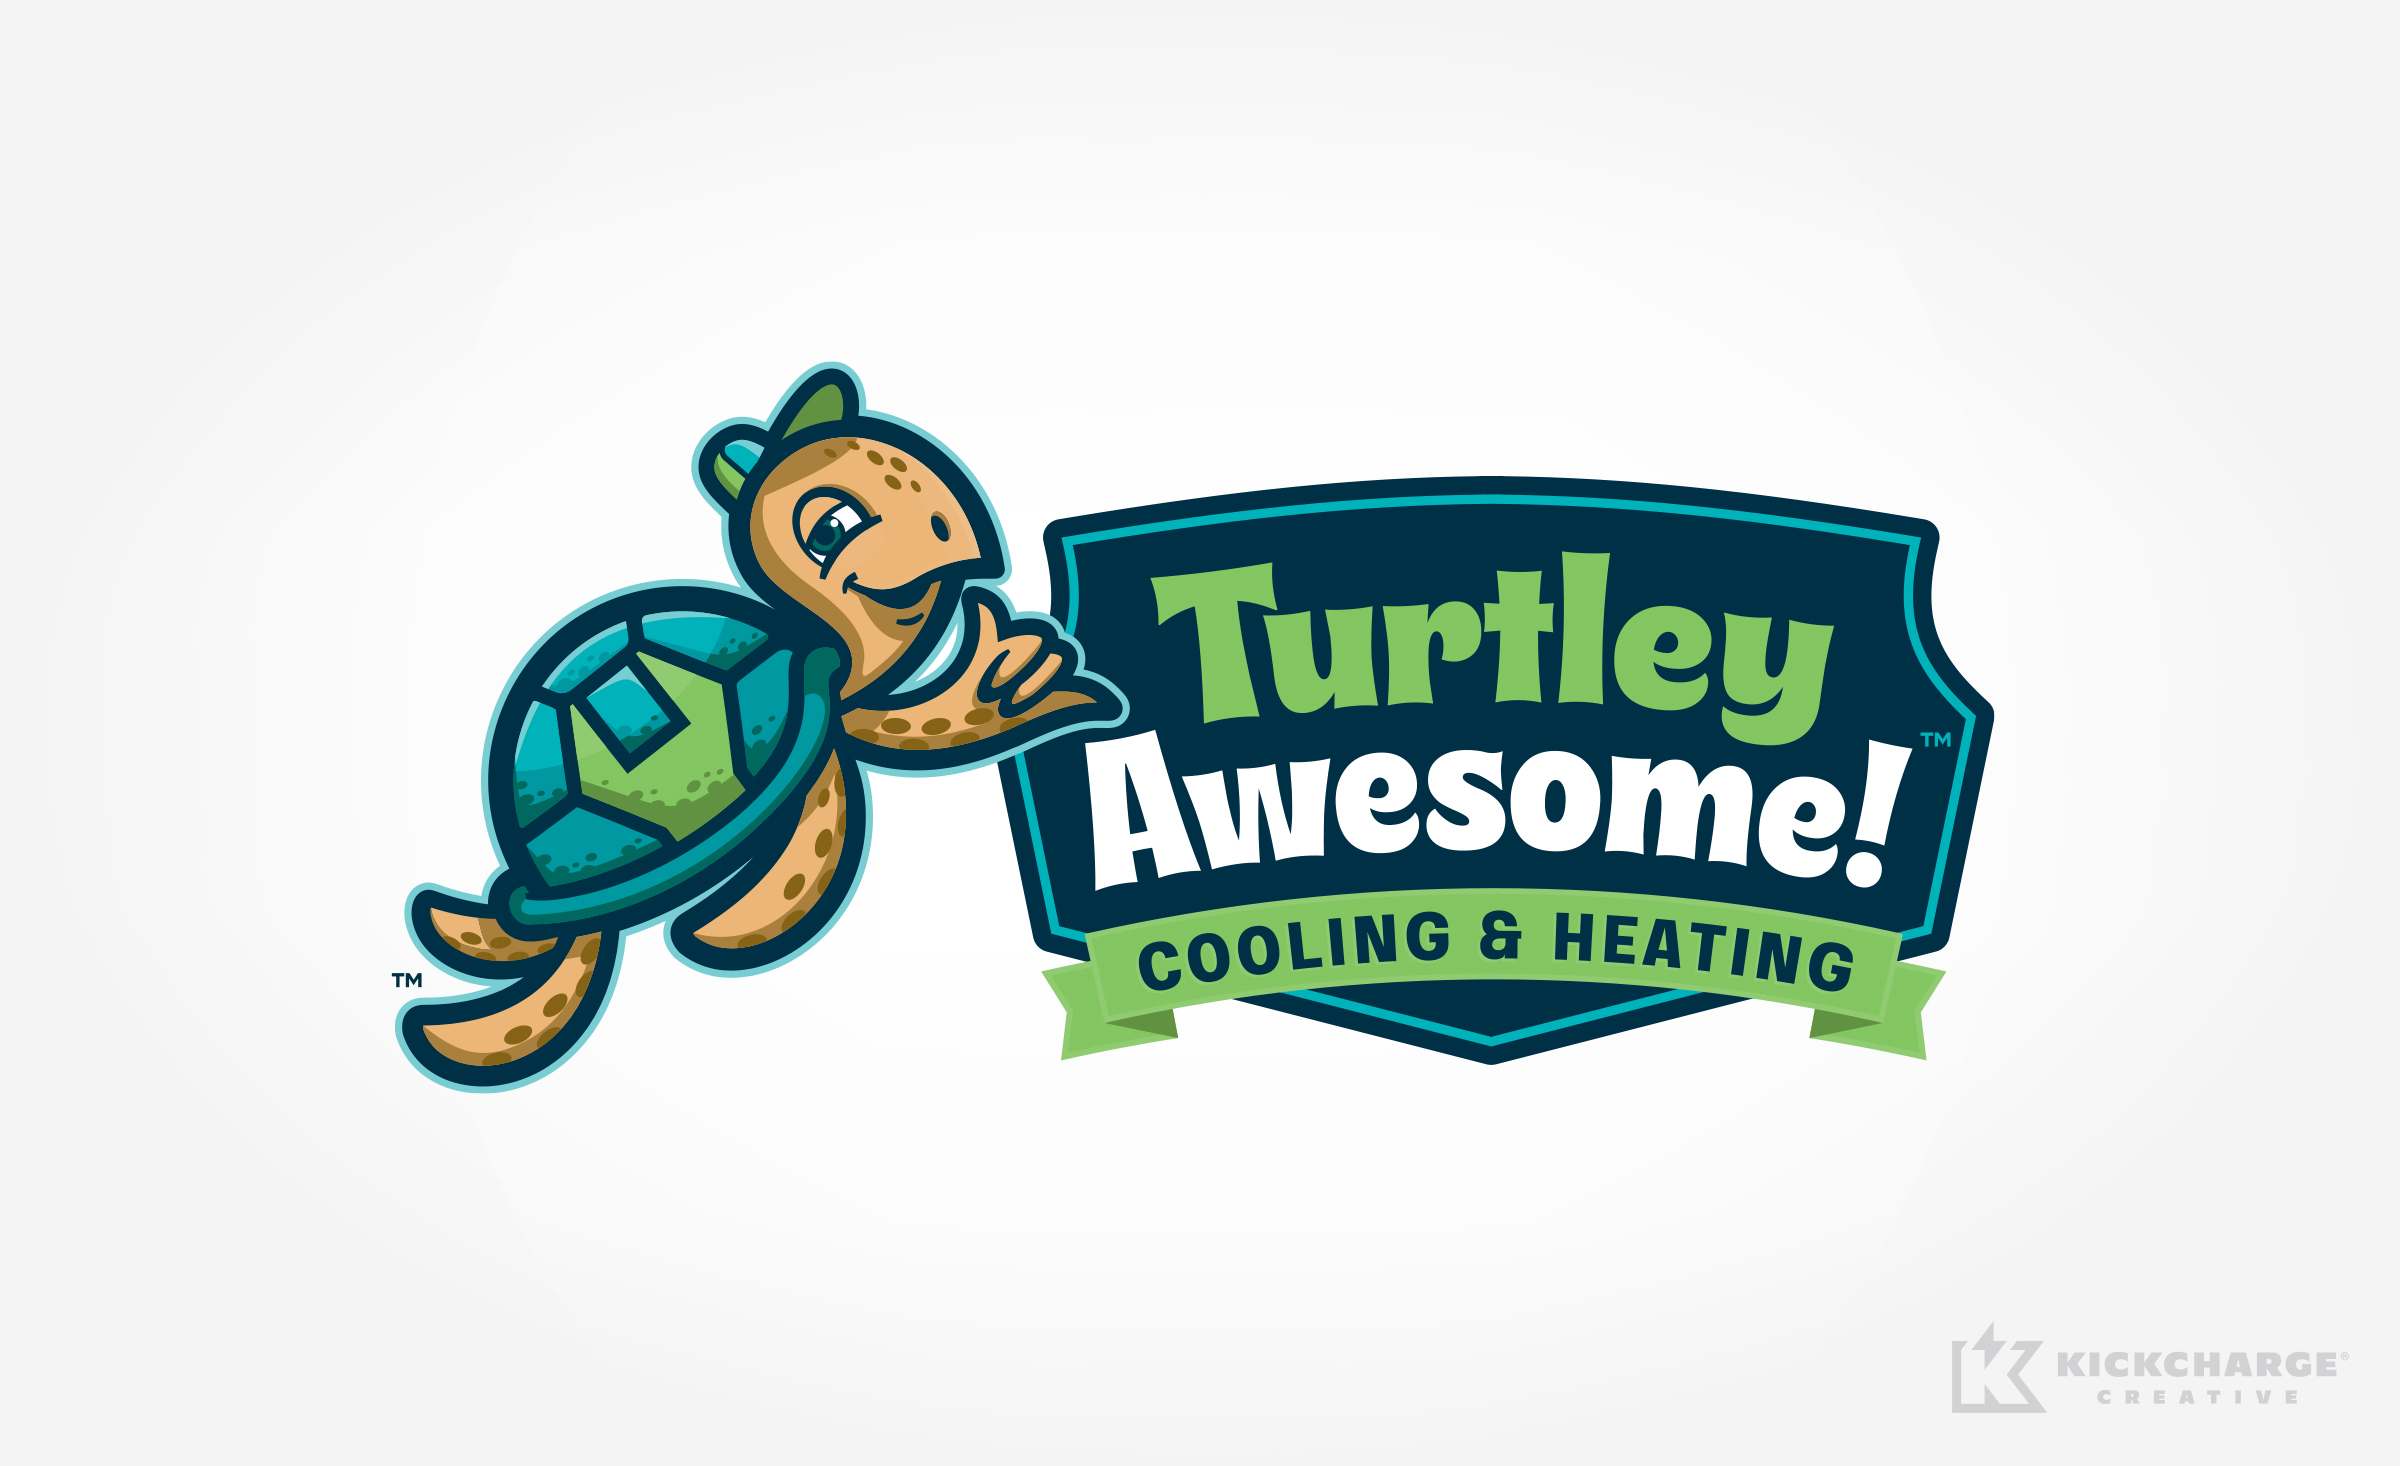 logo design for Turtley Awesome! Cooling & Heating